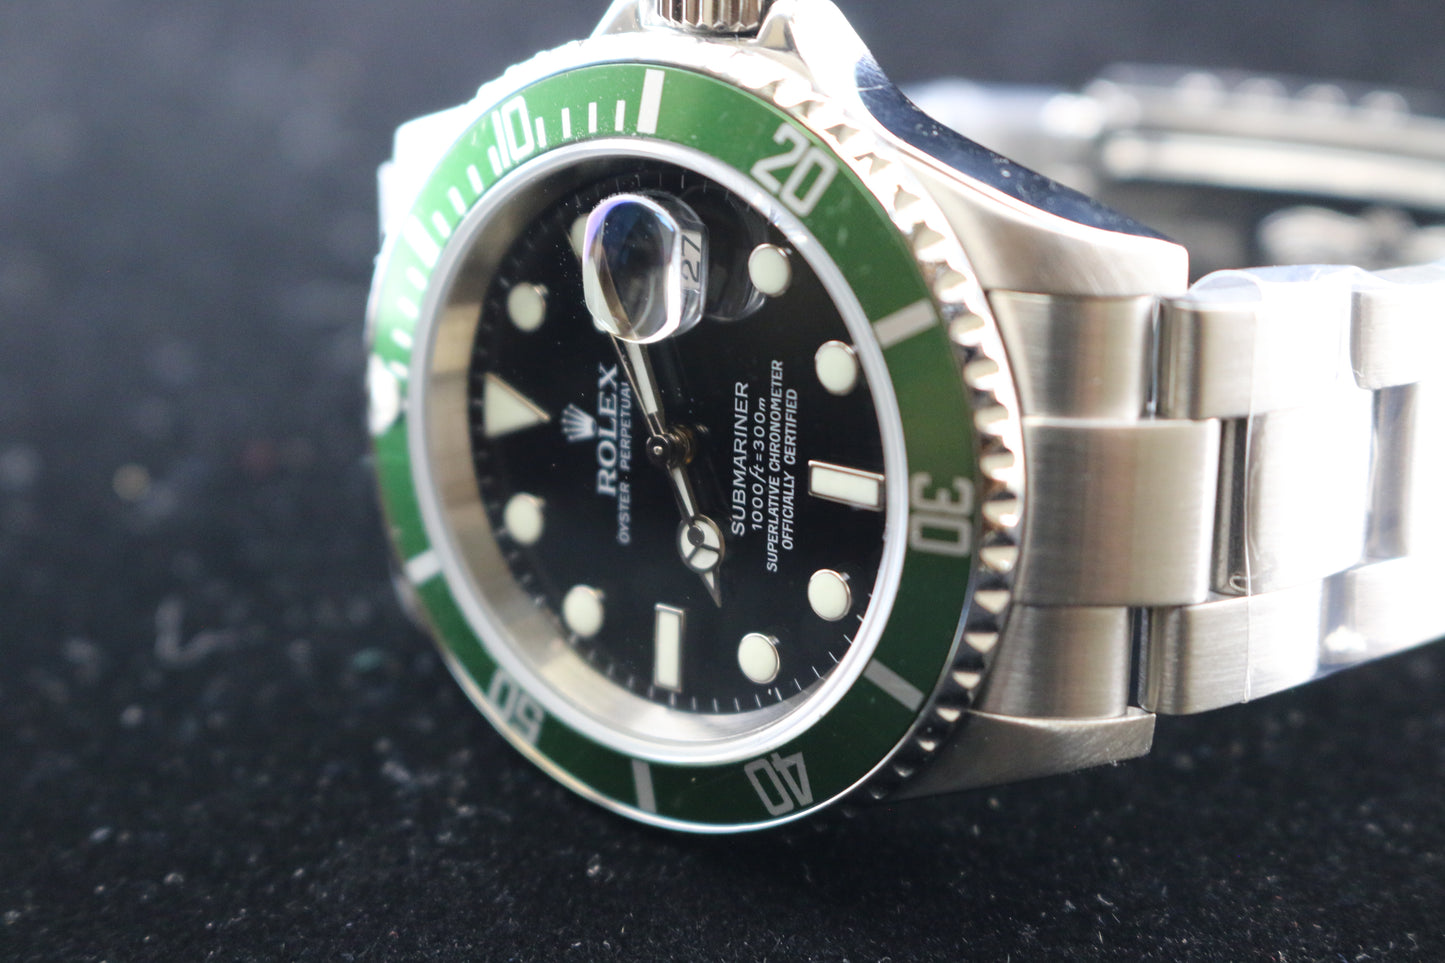 OH Rolex 2006 Submariner 16610 LV Kermit Oyster W/ Rsc Papers 40mm